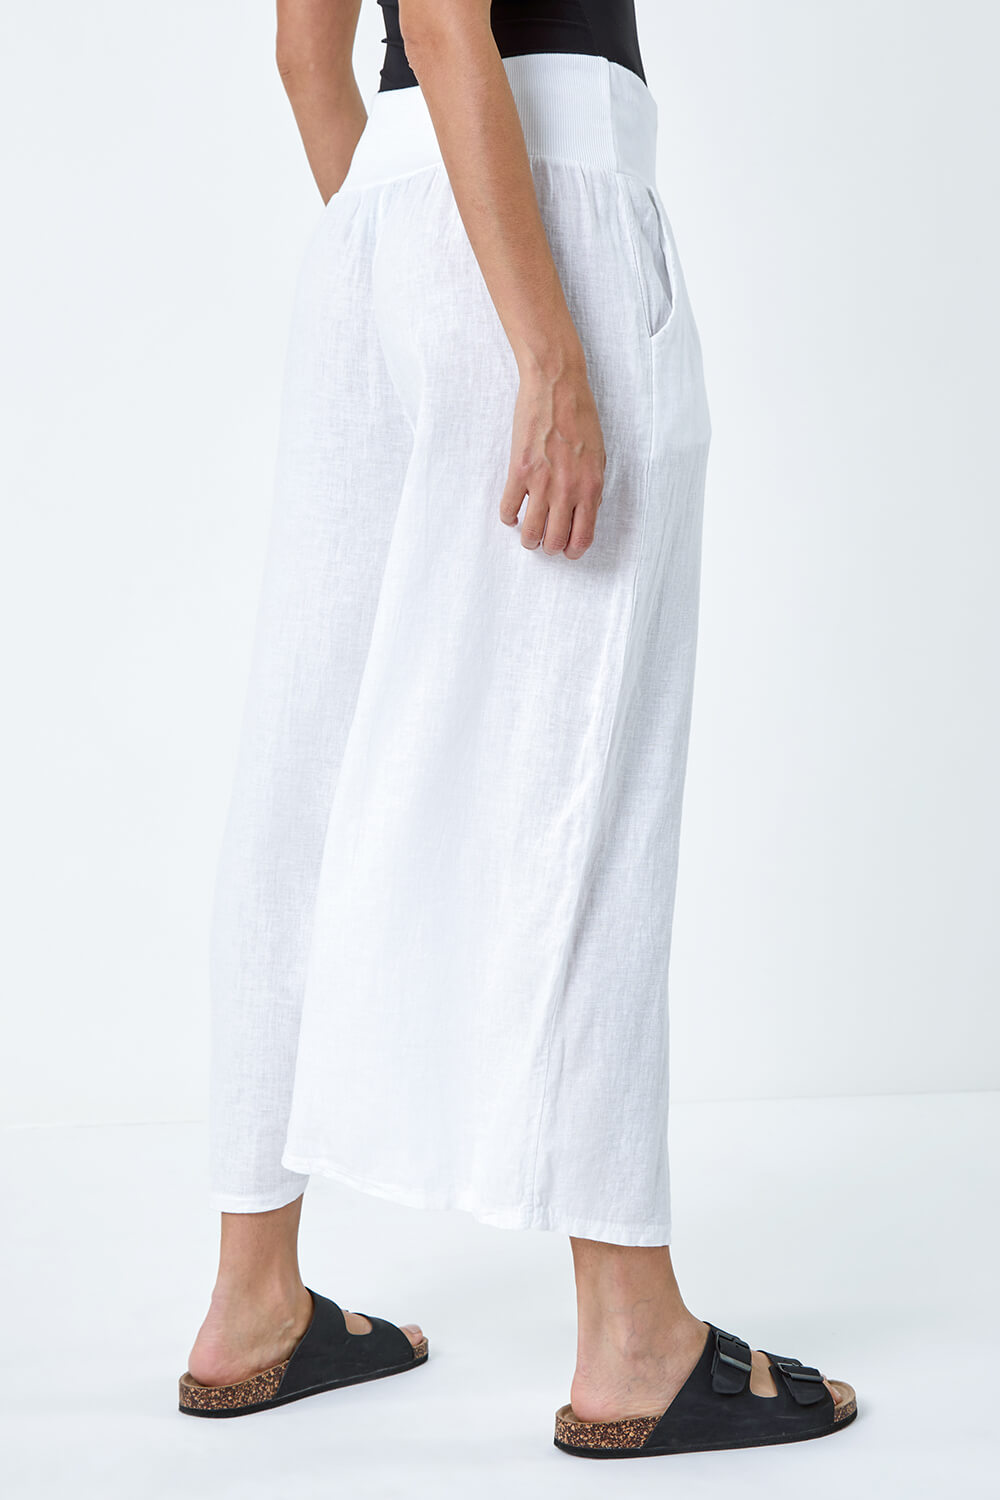 White Linen Blend Stretch Waist Culottes, Image 3 of 5